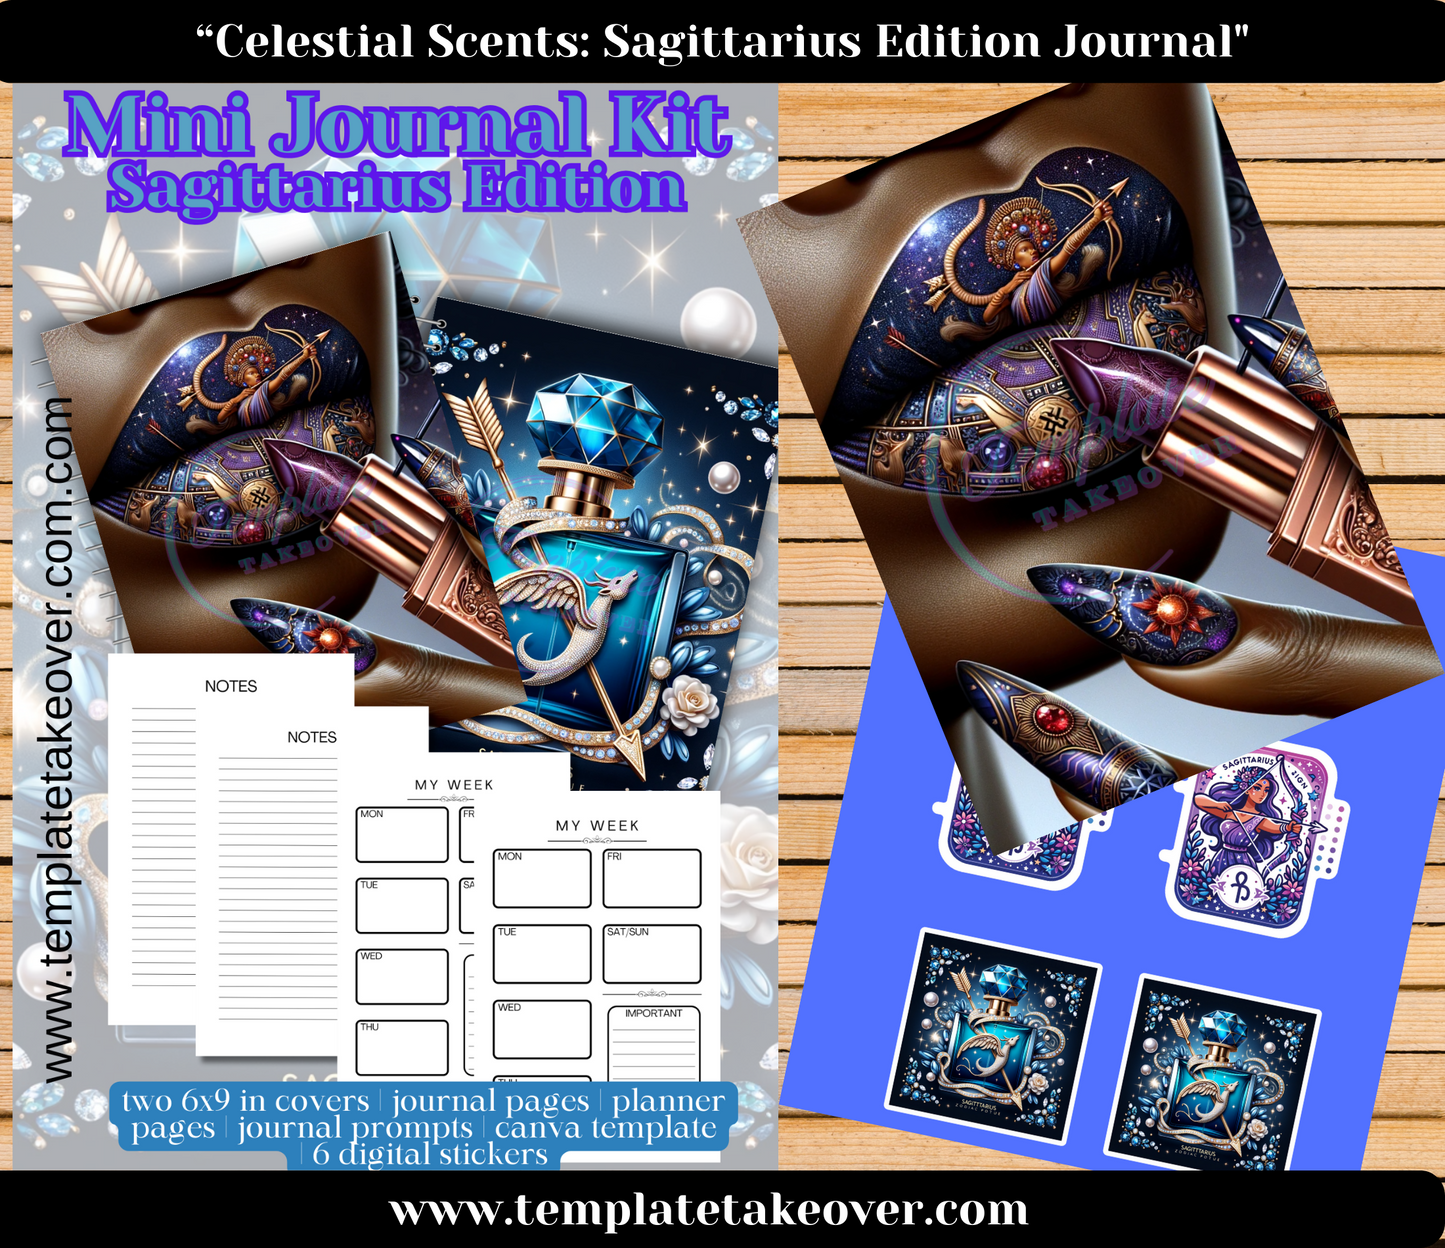 Celestial Scents: Sagittarius Edition Journal: Perfect for Crafters, Creatives, Coaches, and More - Set of 2 Covers, 15 Journal Pages, 5 Planner Pages, 15 Prompts and 6 Digital Stickers. Volume 3